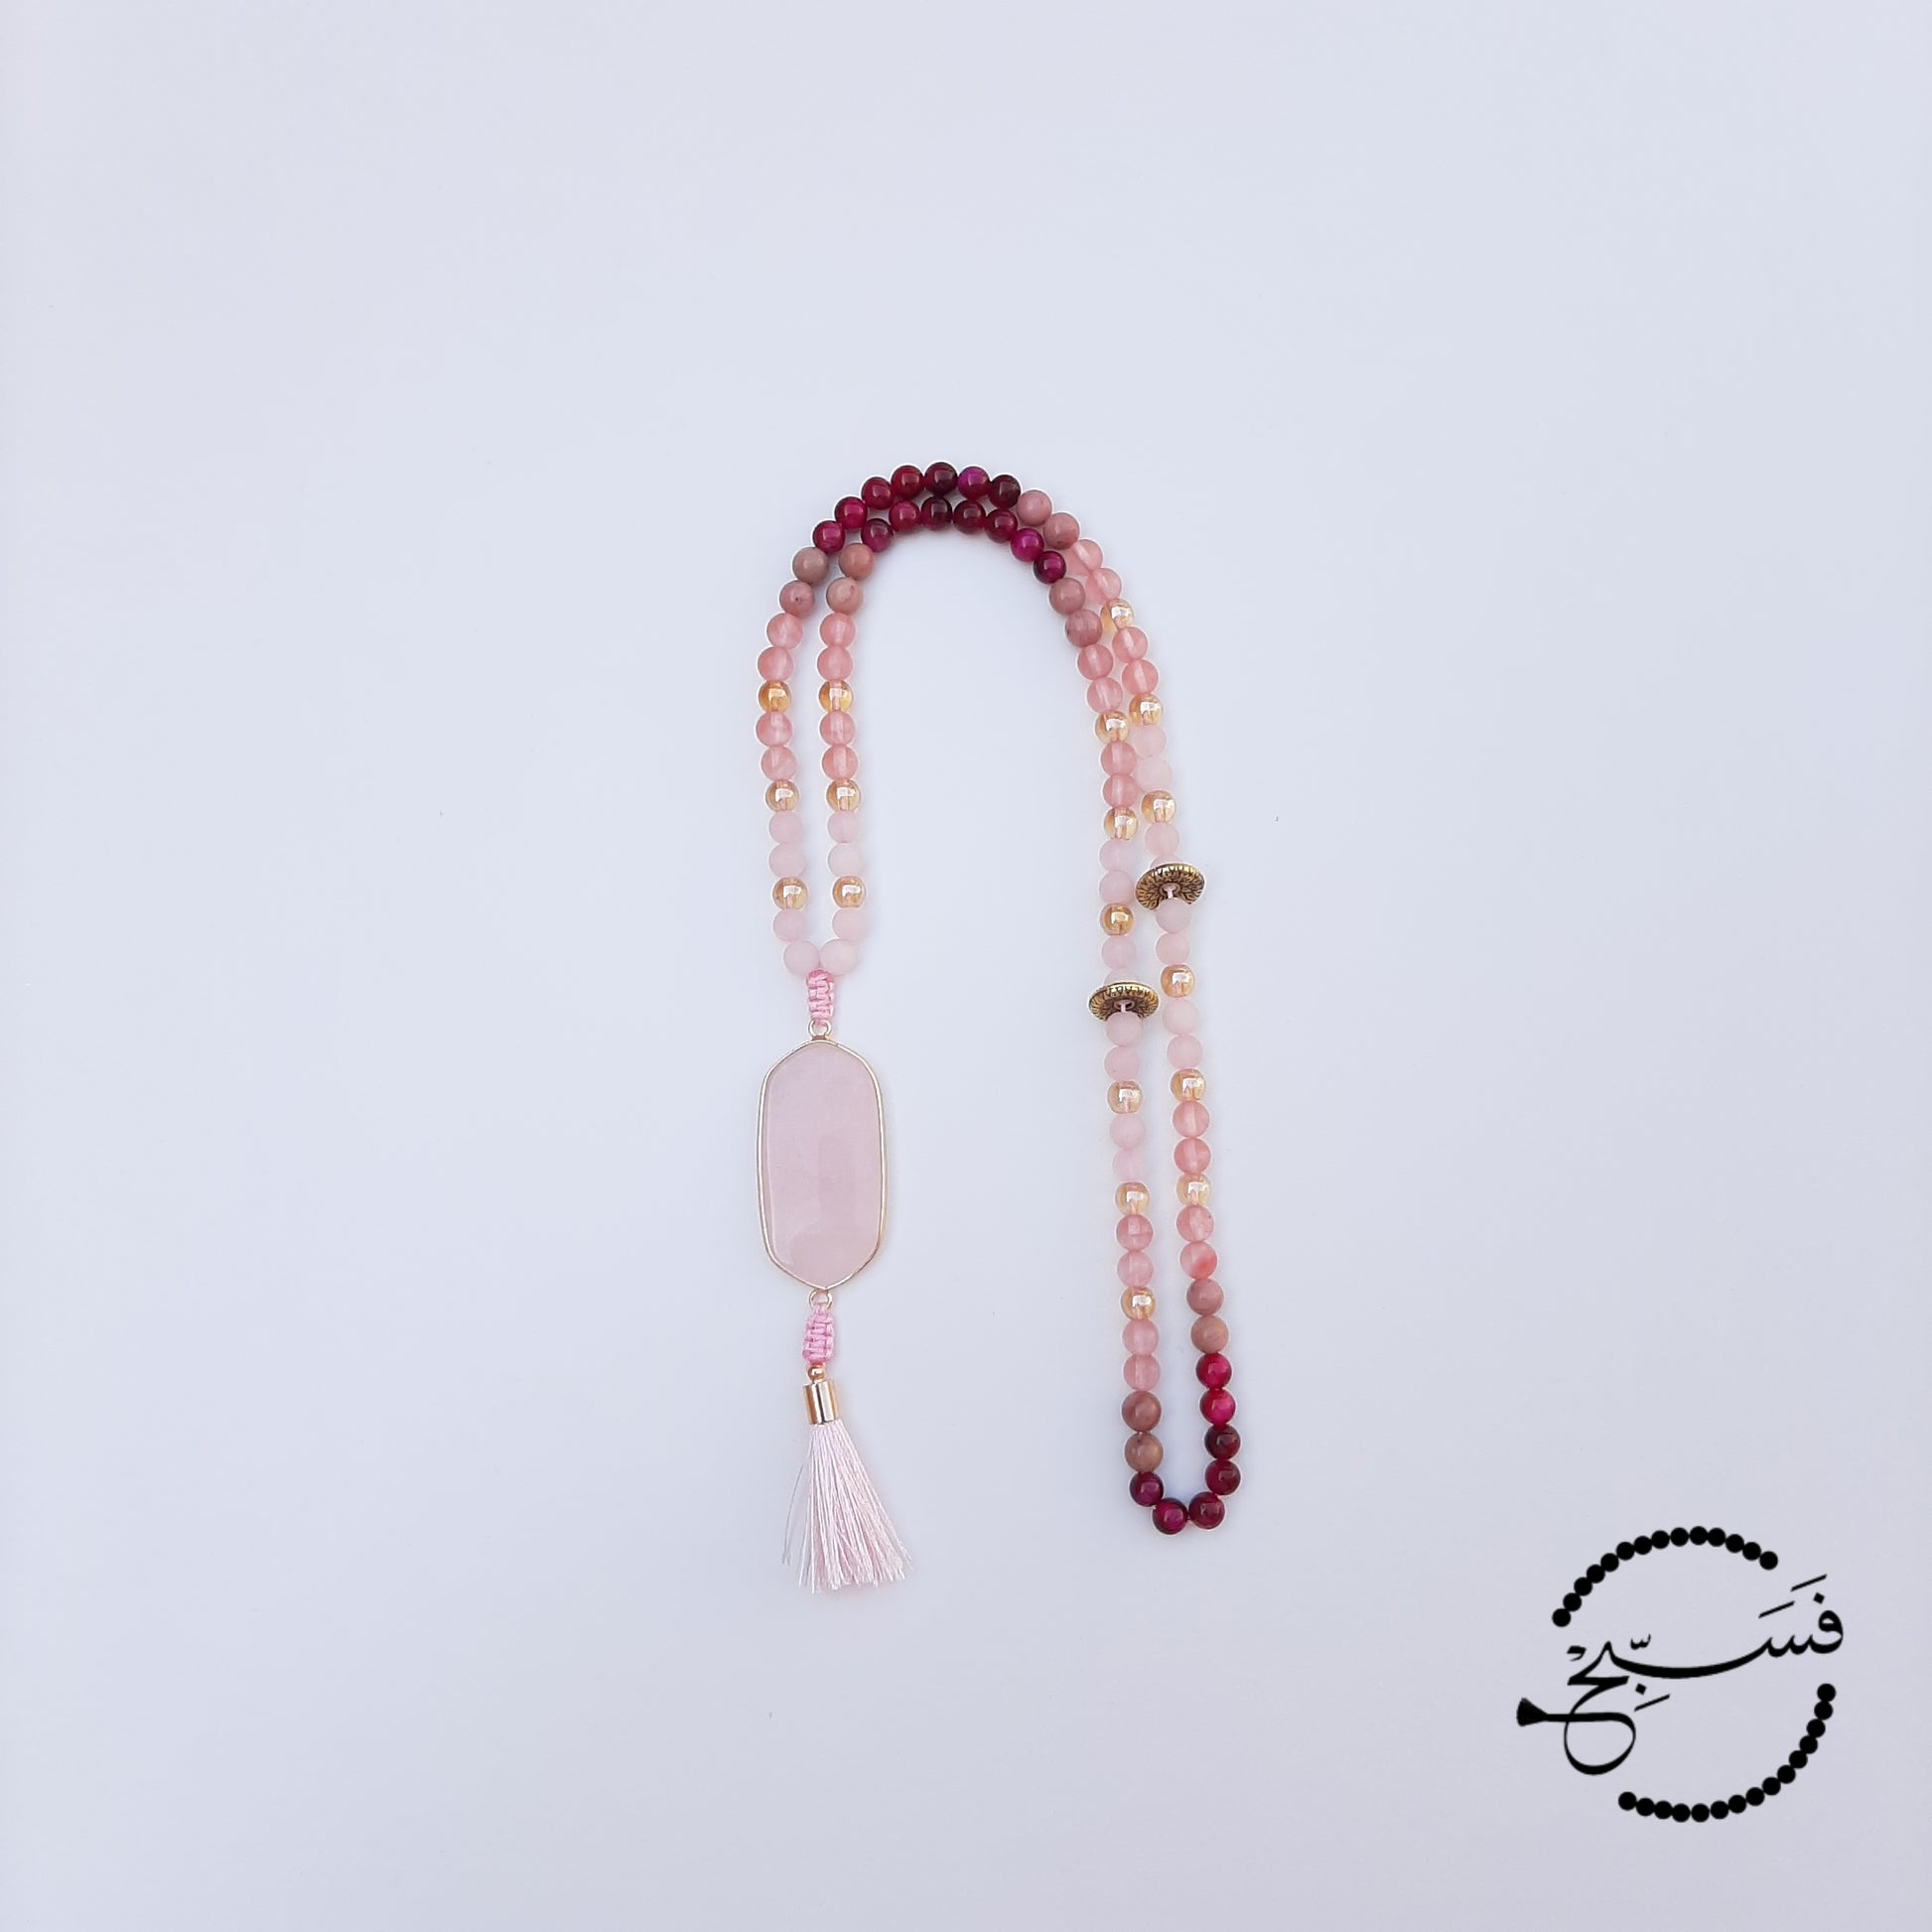 These pieces are made from watermelon and rose quartz, rhodonite, and fuchsia tiger eye beads. A beautifully shaped rose quartz pendant and pink tassel complete the piece.  Comes packaged in a luxurious pouch and a gift box.  99 beads